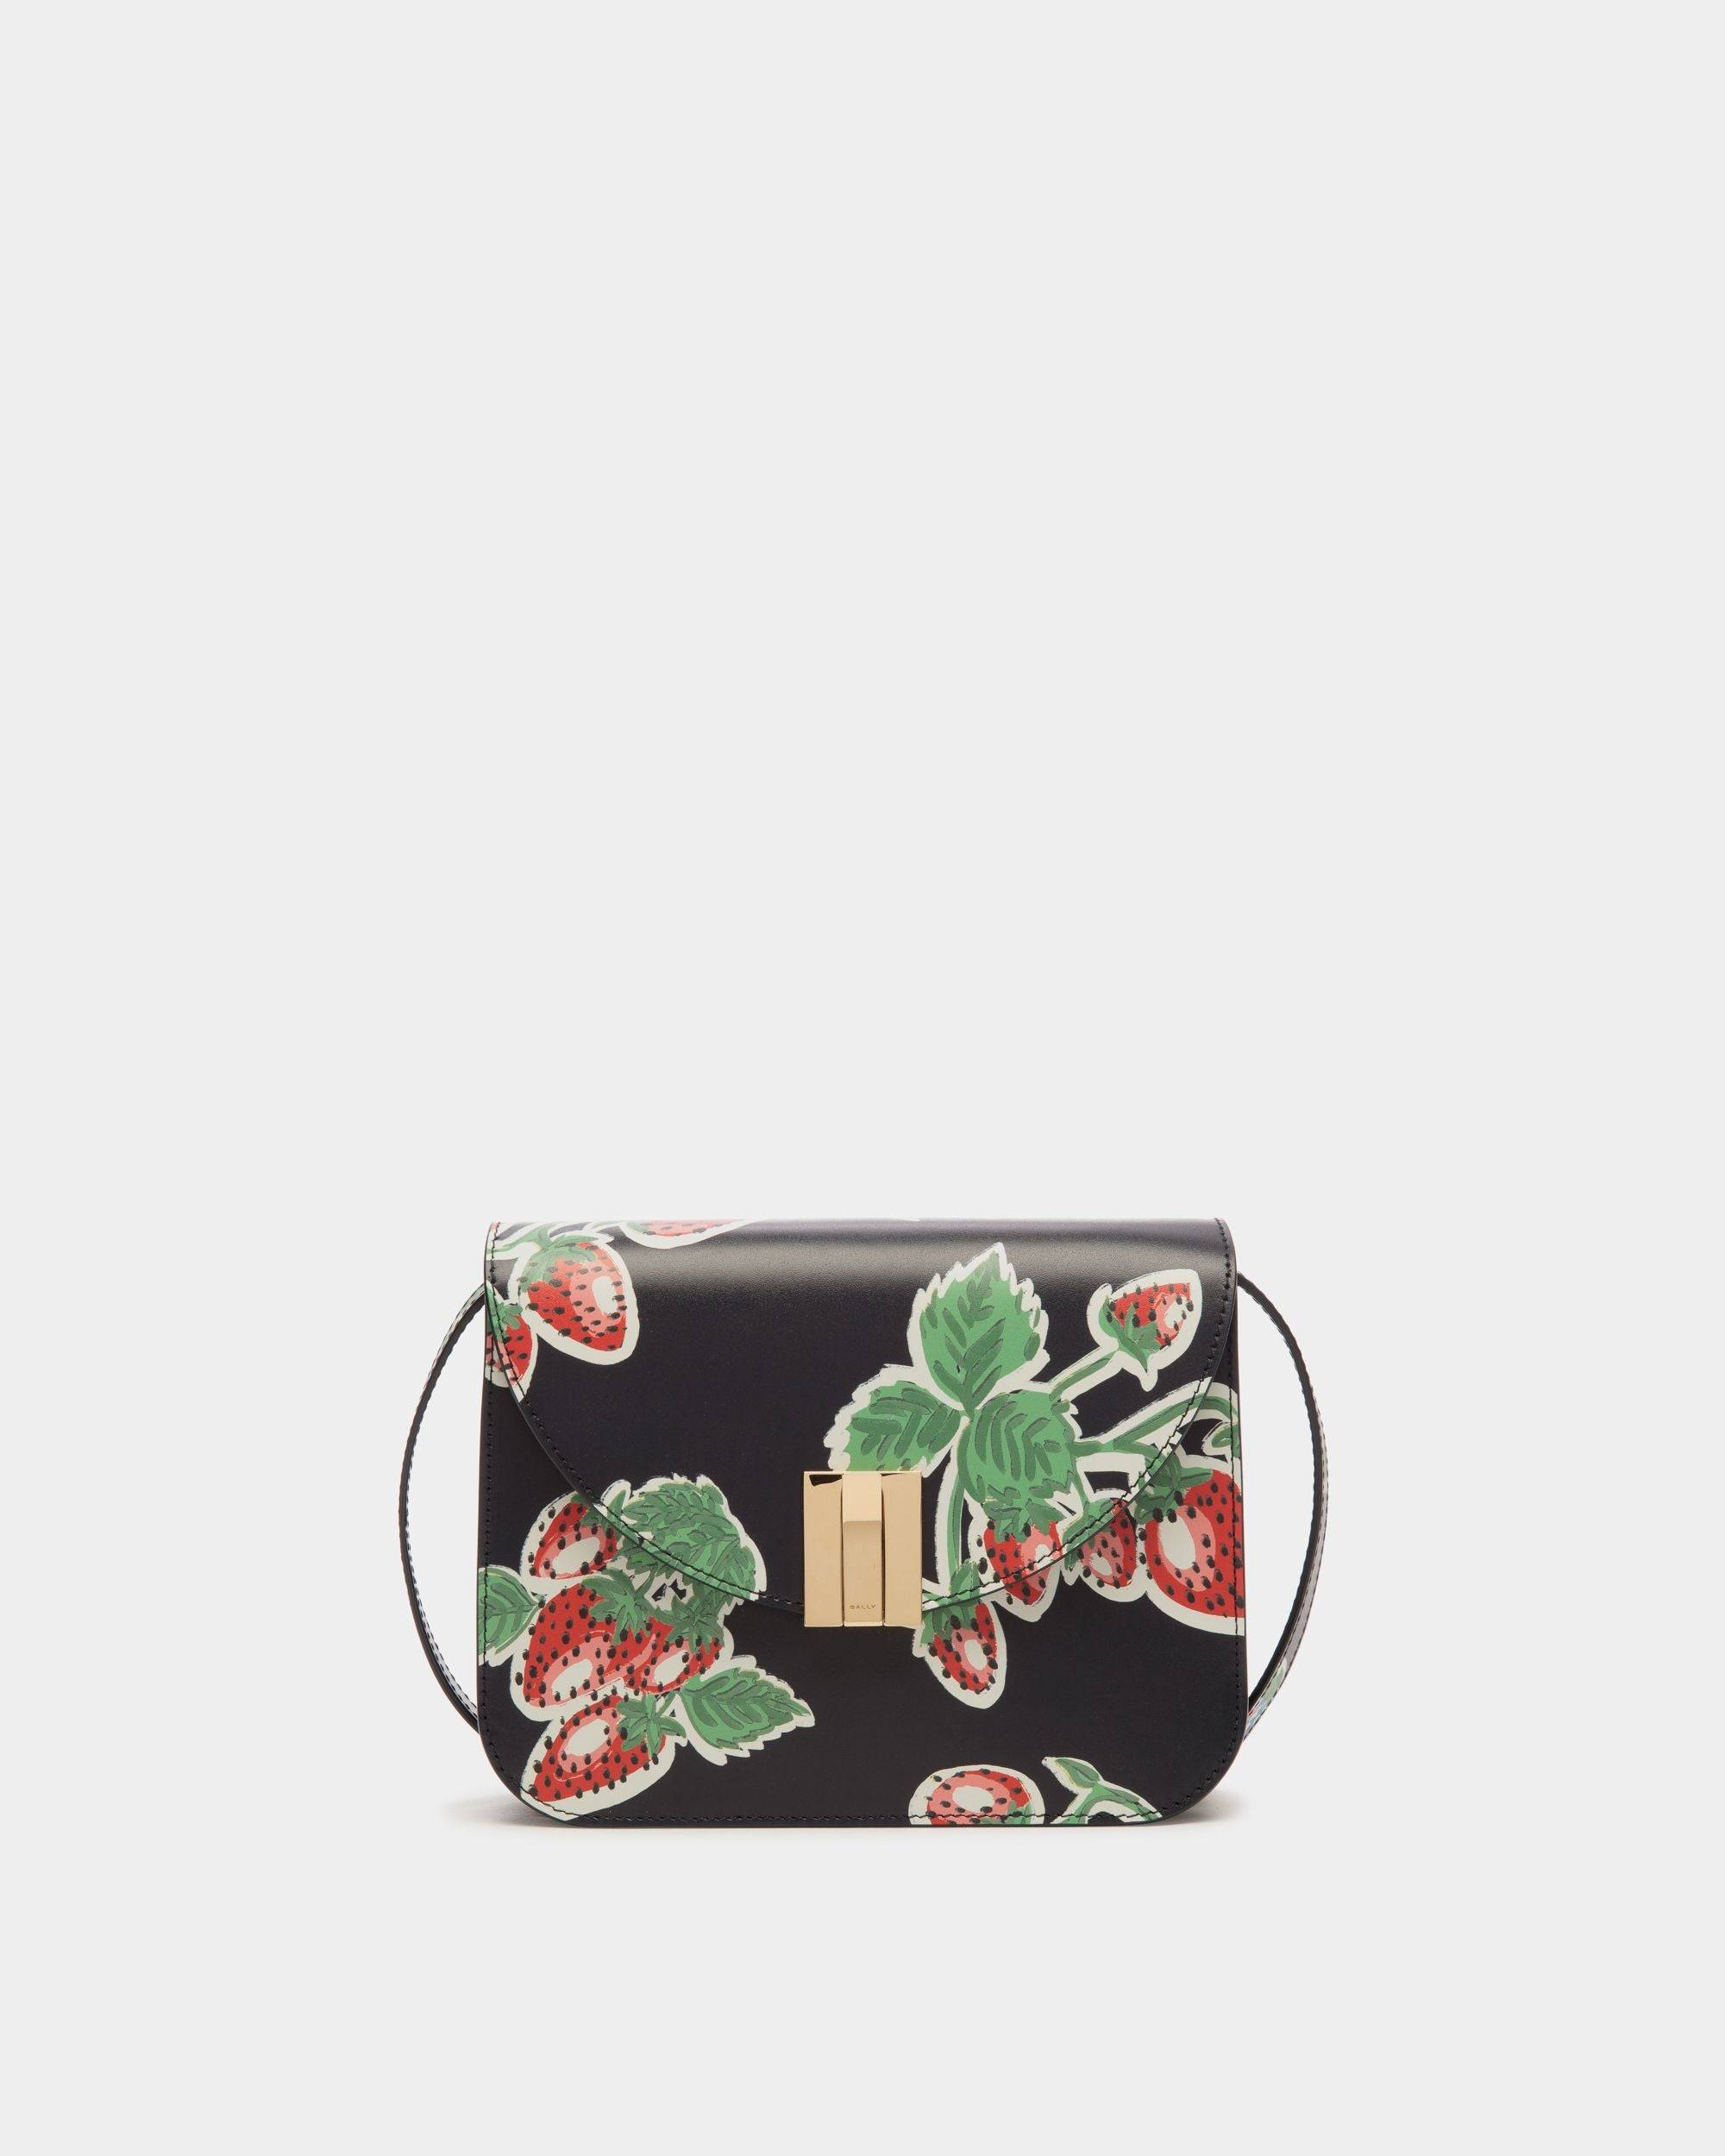 Ollam | Women's Crossbody Bag in Strawberry Print Leather | Bally | Still Life Front